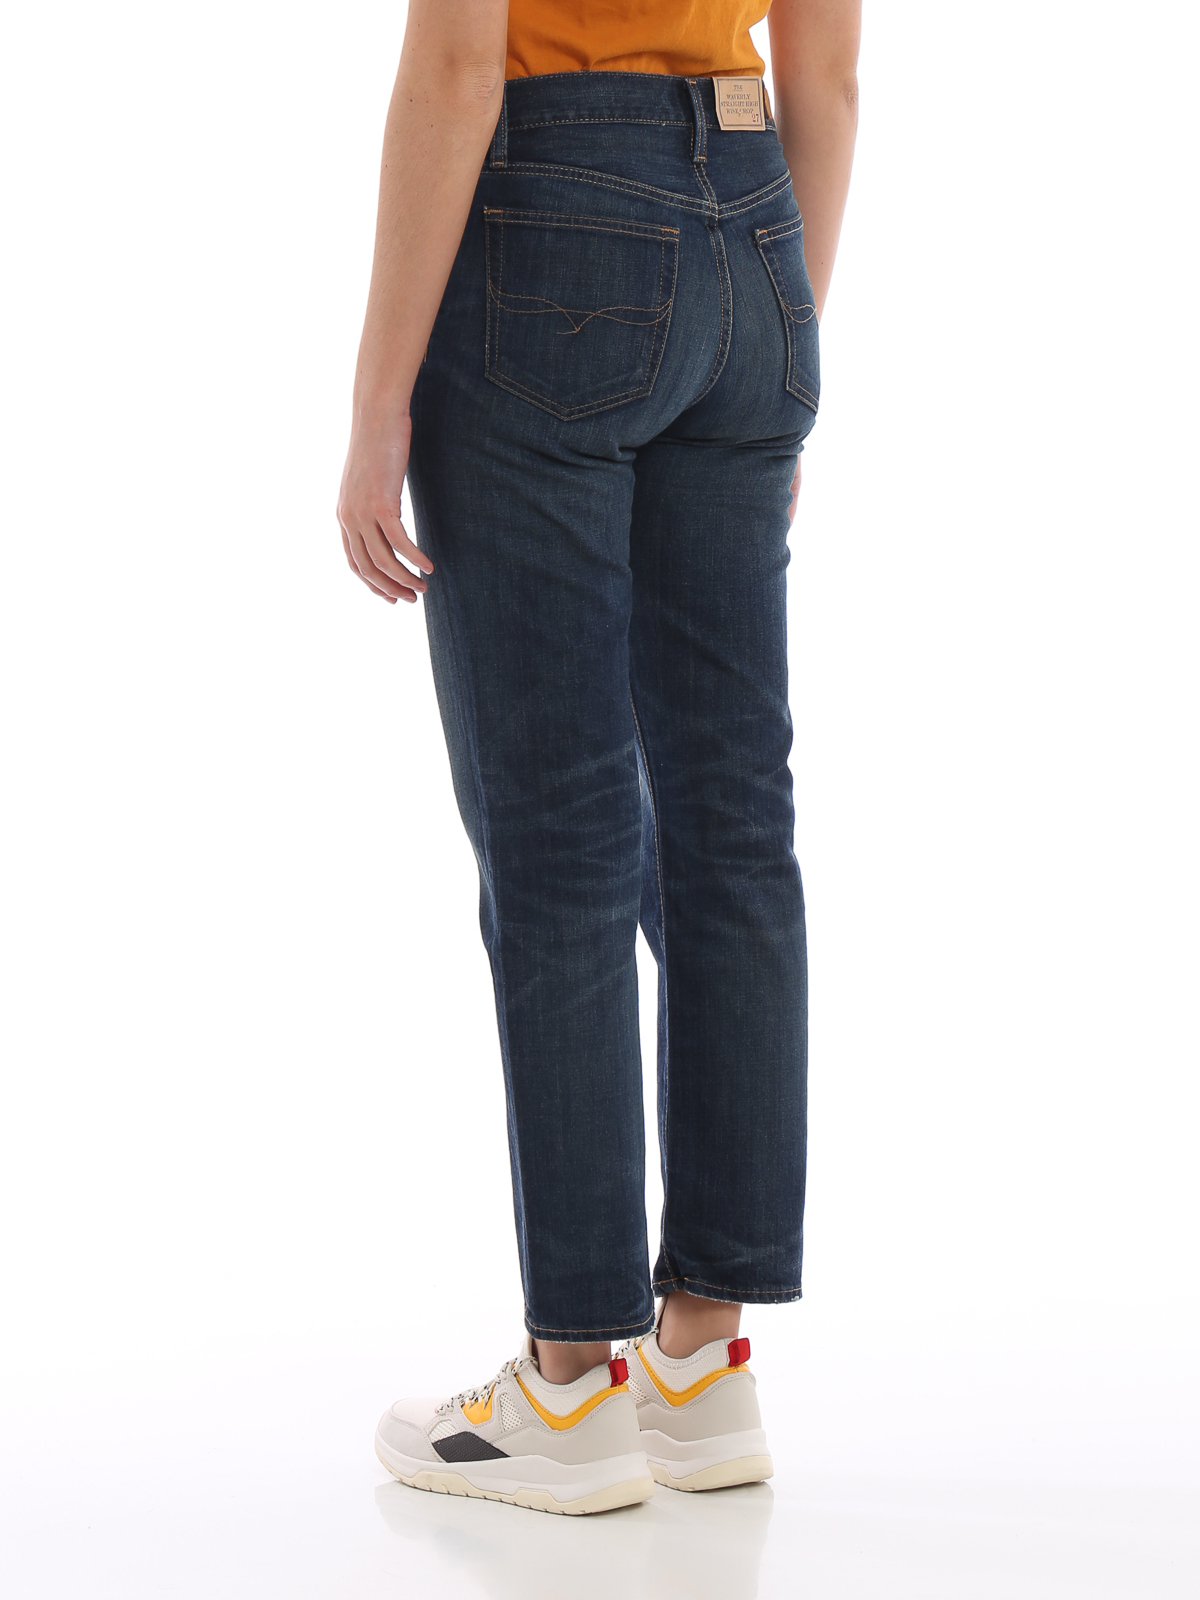 Moden At søge tilflugt Nysgerrighed Straight leg jeans Polo Ralph Lauren - Straight leg cotton blend jeans -  211704116001